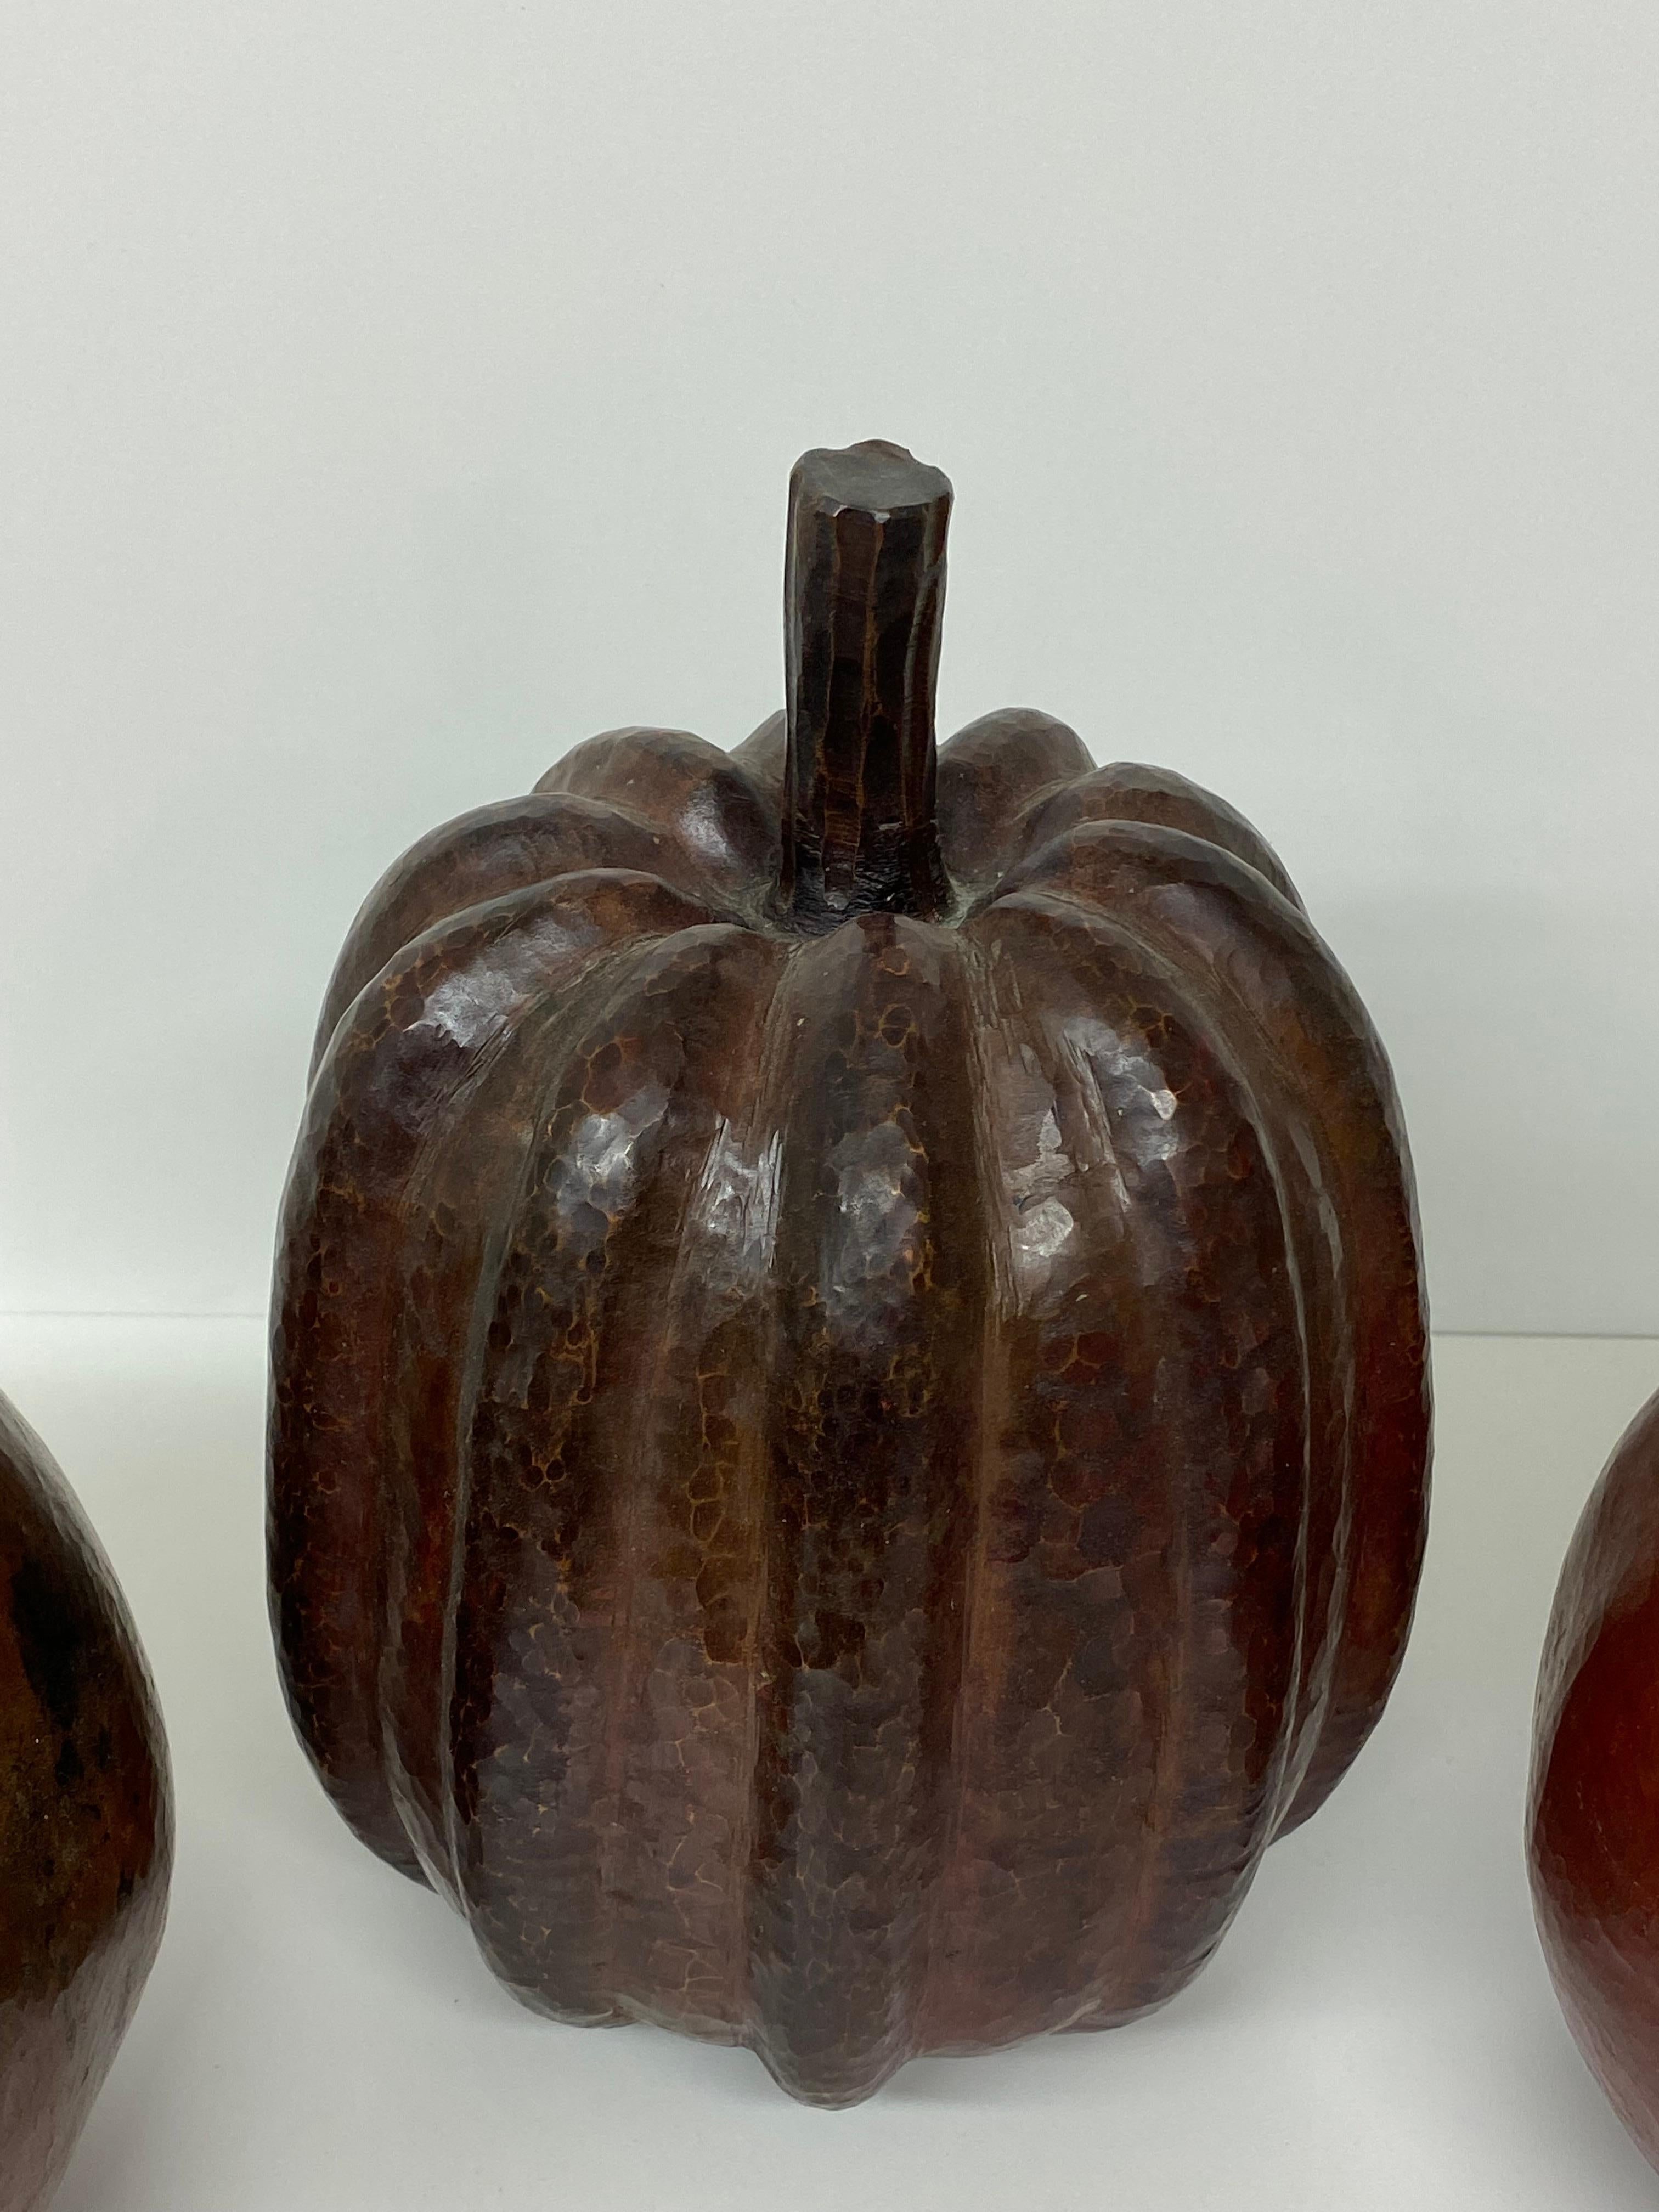 Decorative Copper Apple Pear Pumpkin Sculpture In Good Condition For Sale In North Hollywood, CA